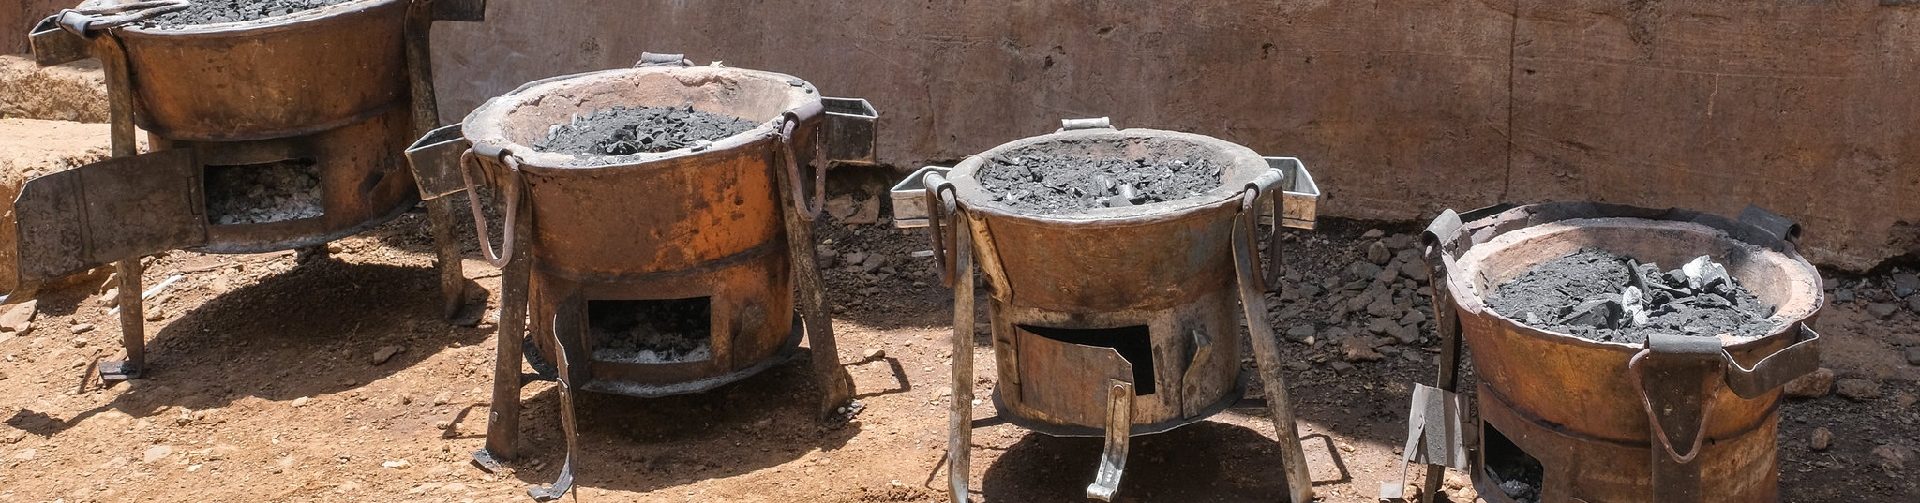 Kenya has been trying to regulate the charcoal sector: why it’s not working